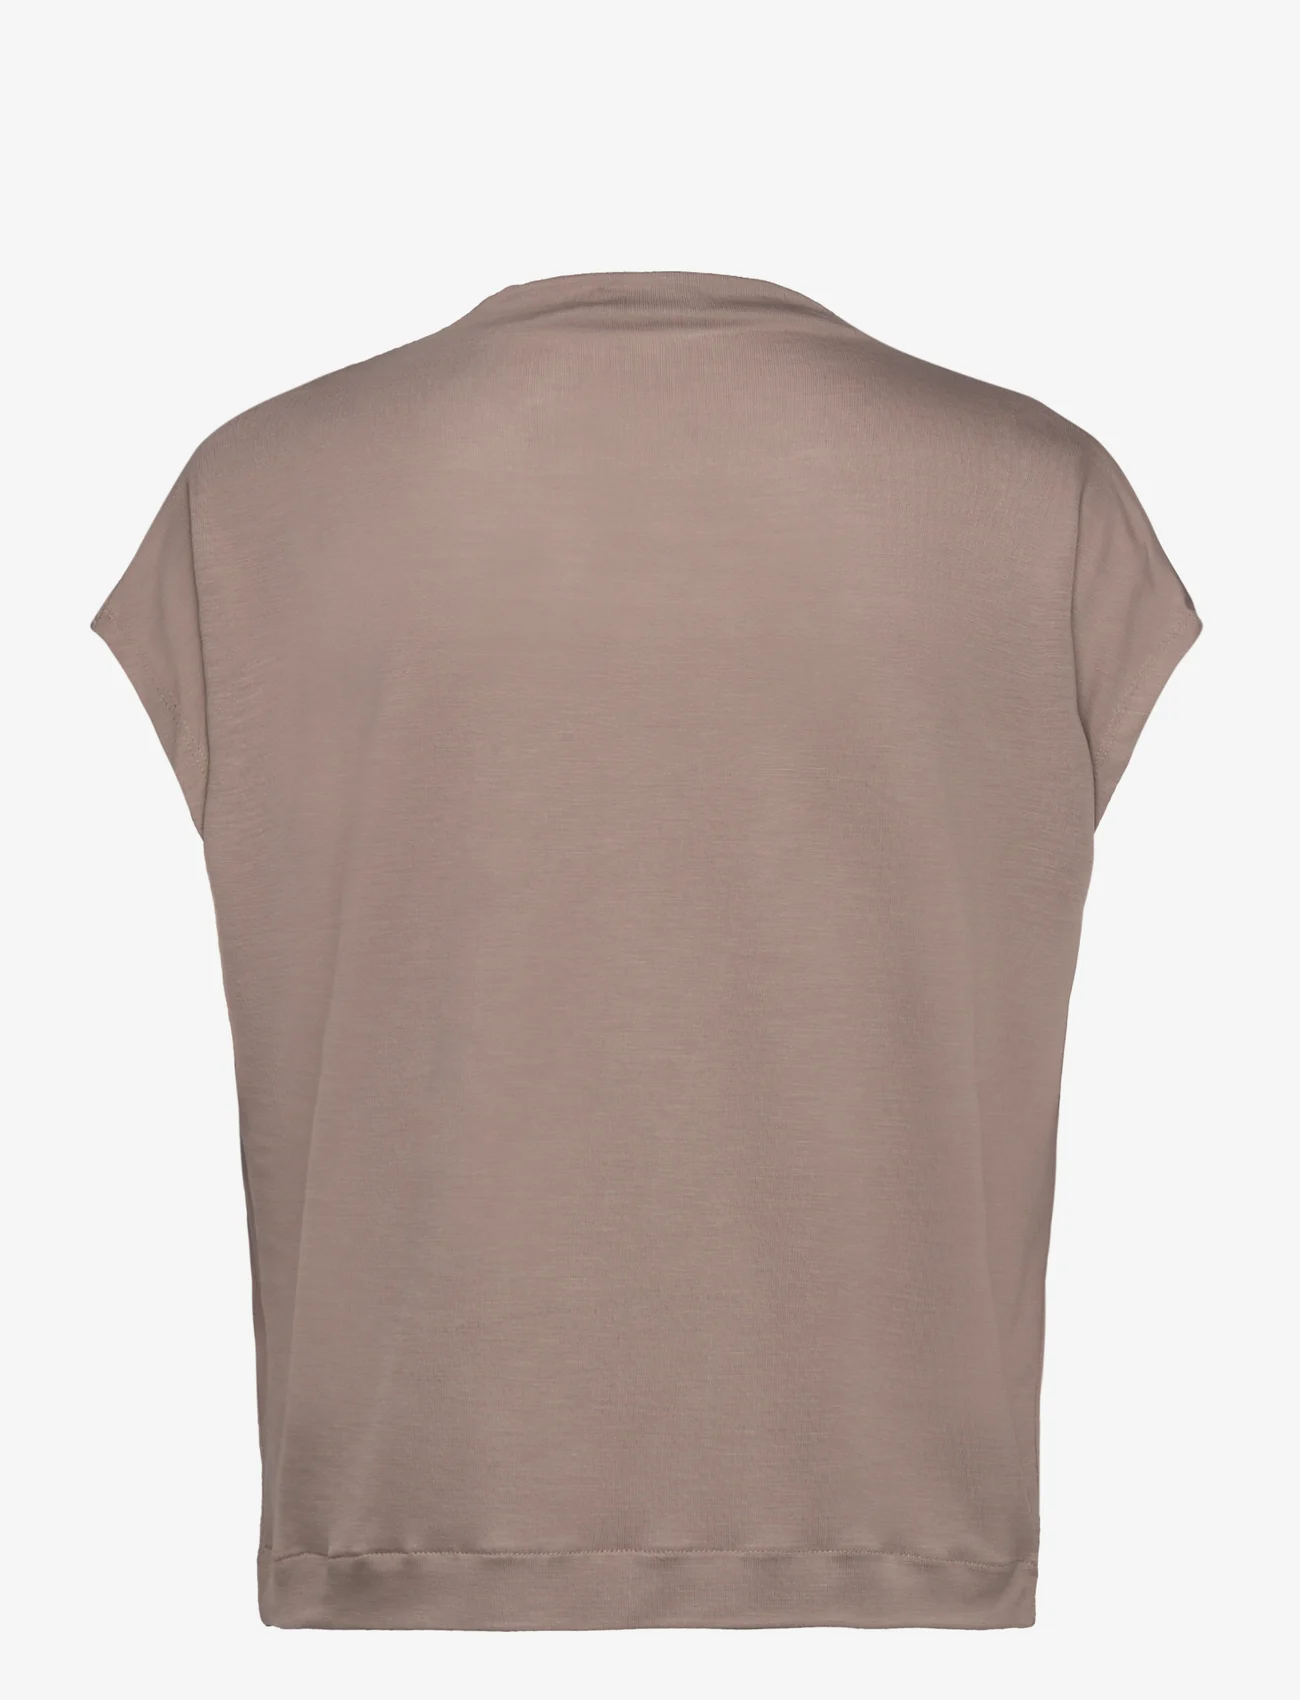 Esprit Casual - T-Shirts - t-shirts - light taupe - 1